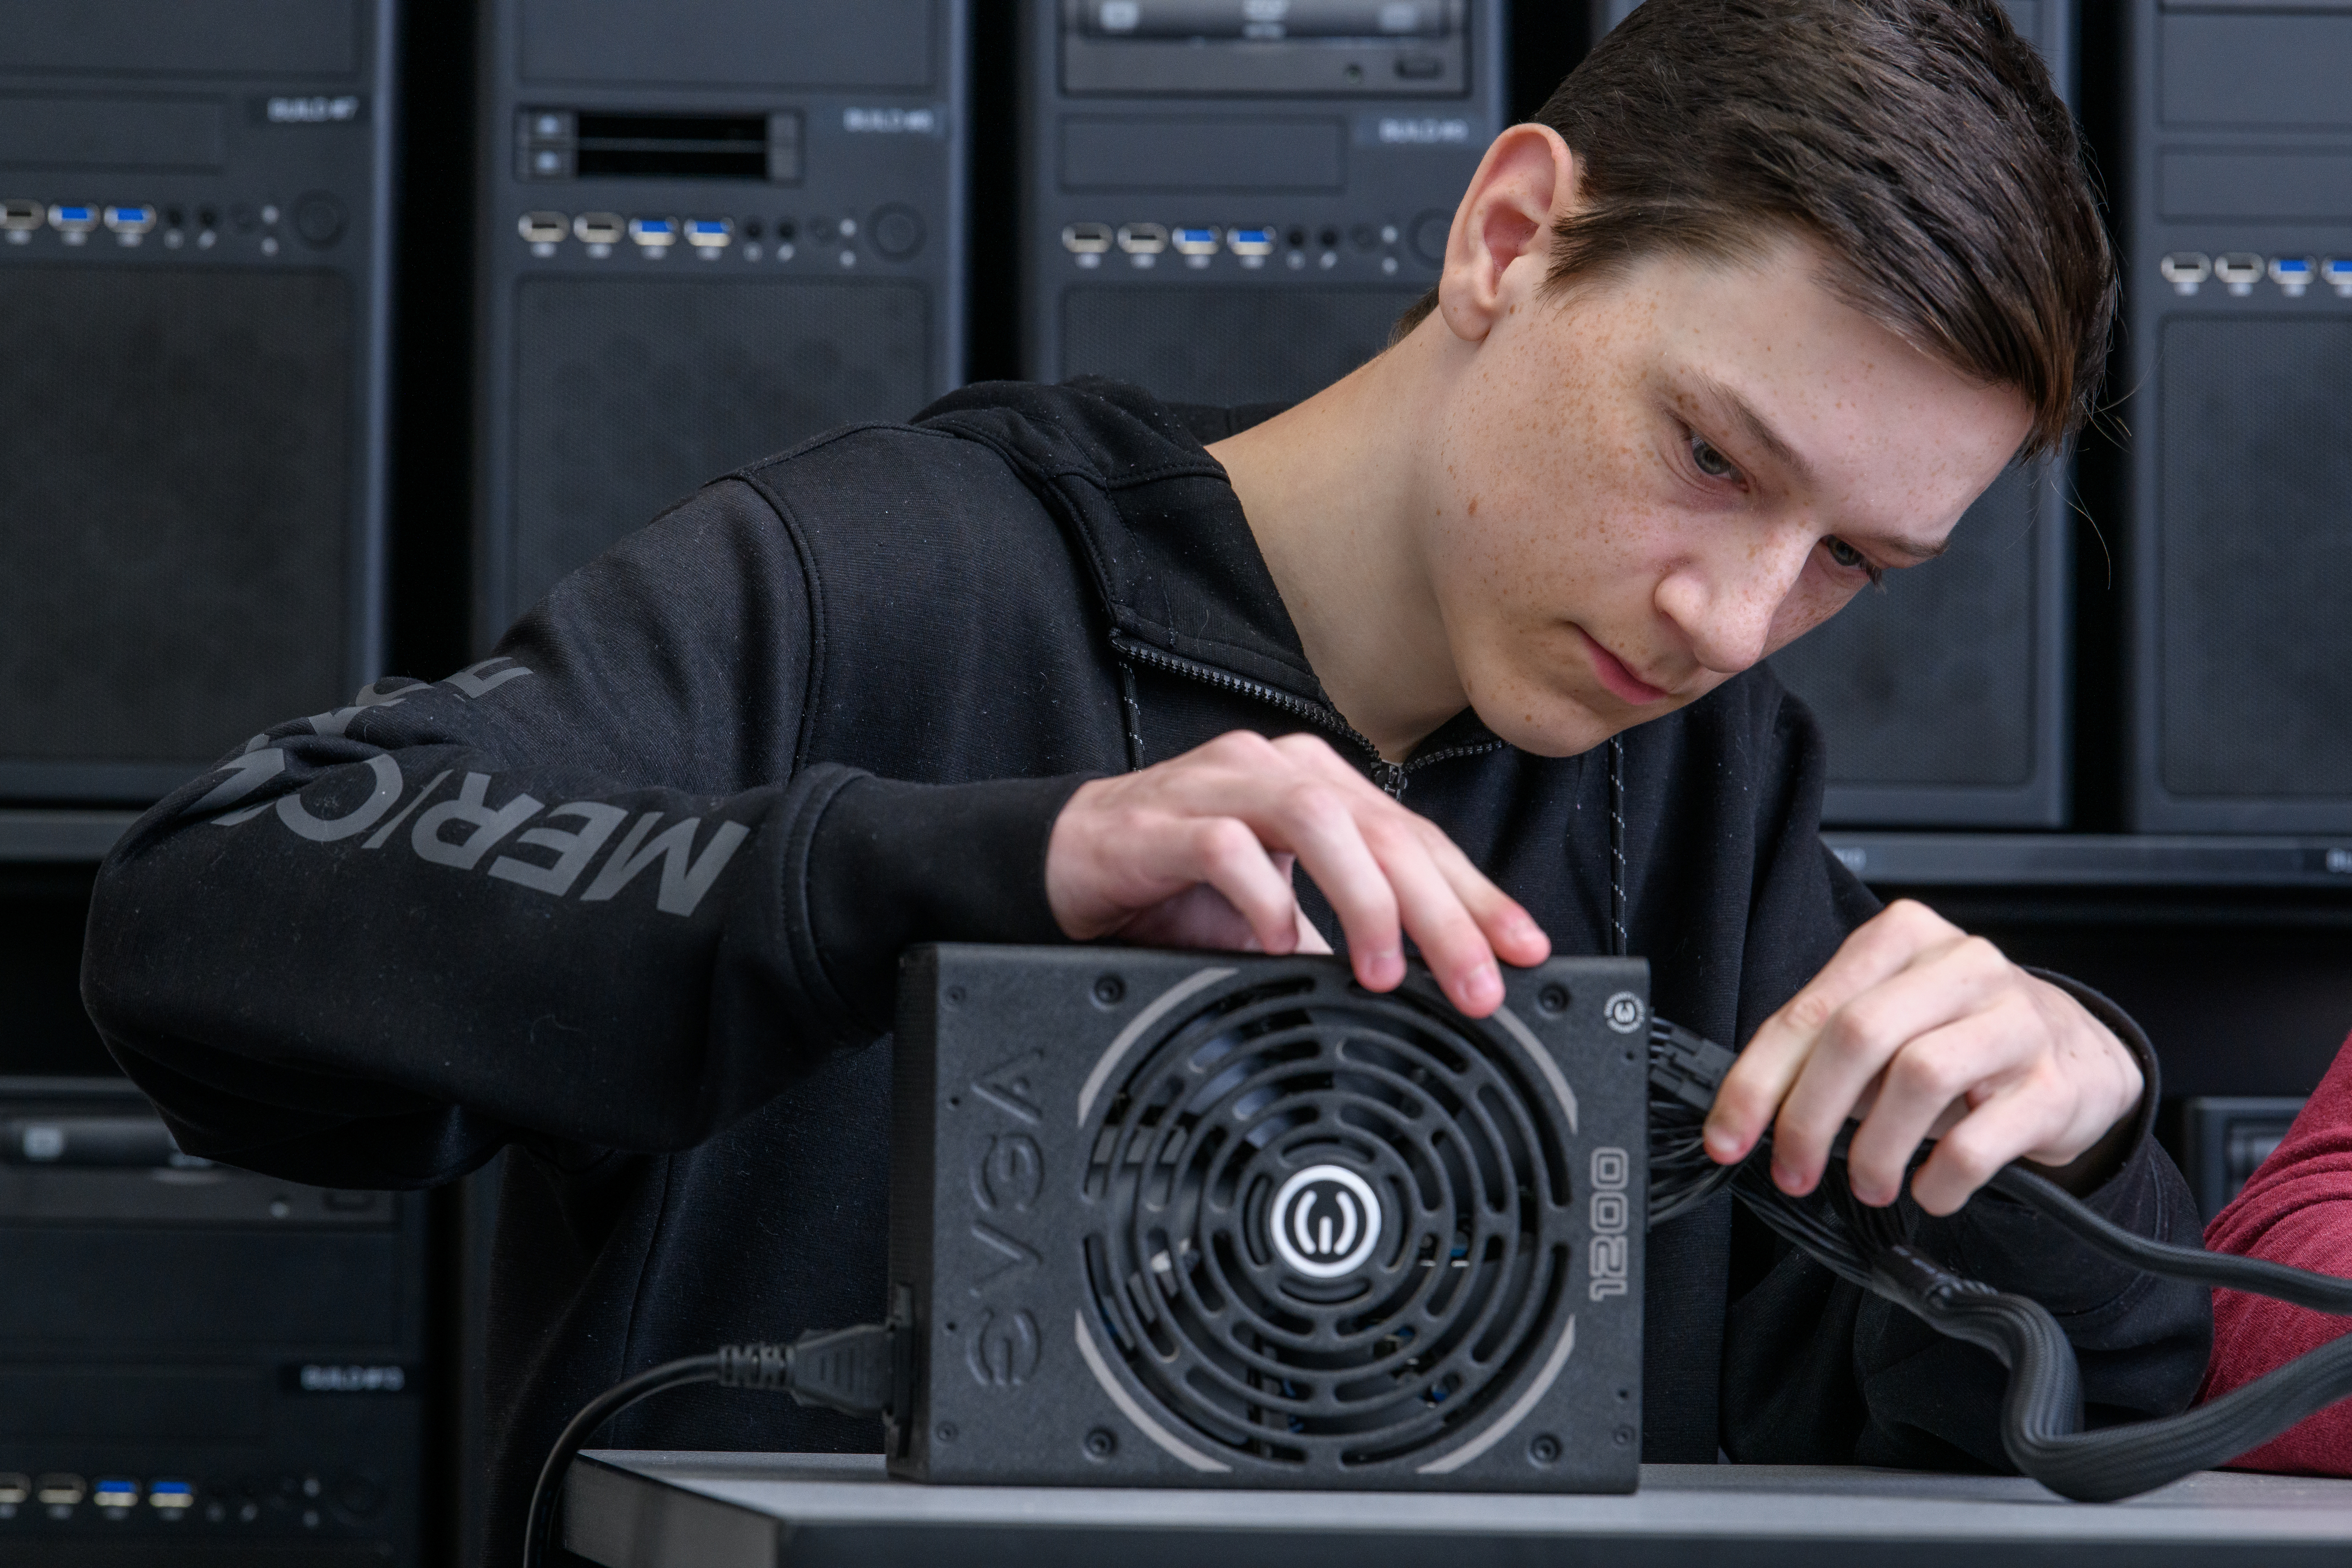 Male Cybersecurity student works on equipment for a computer in the lab.